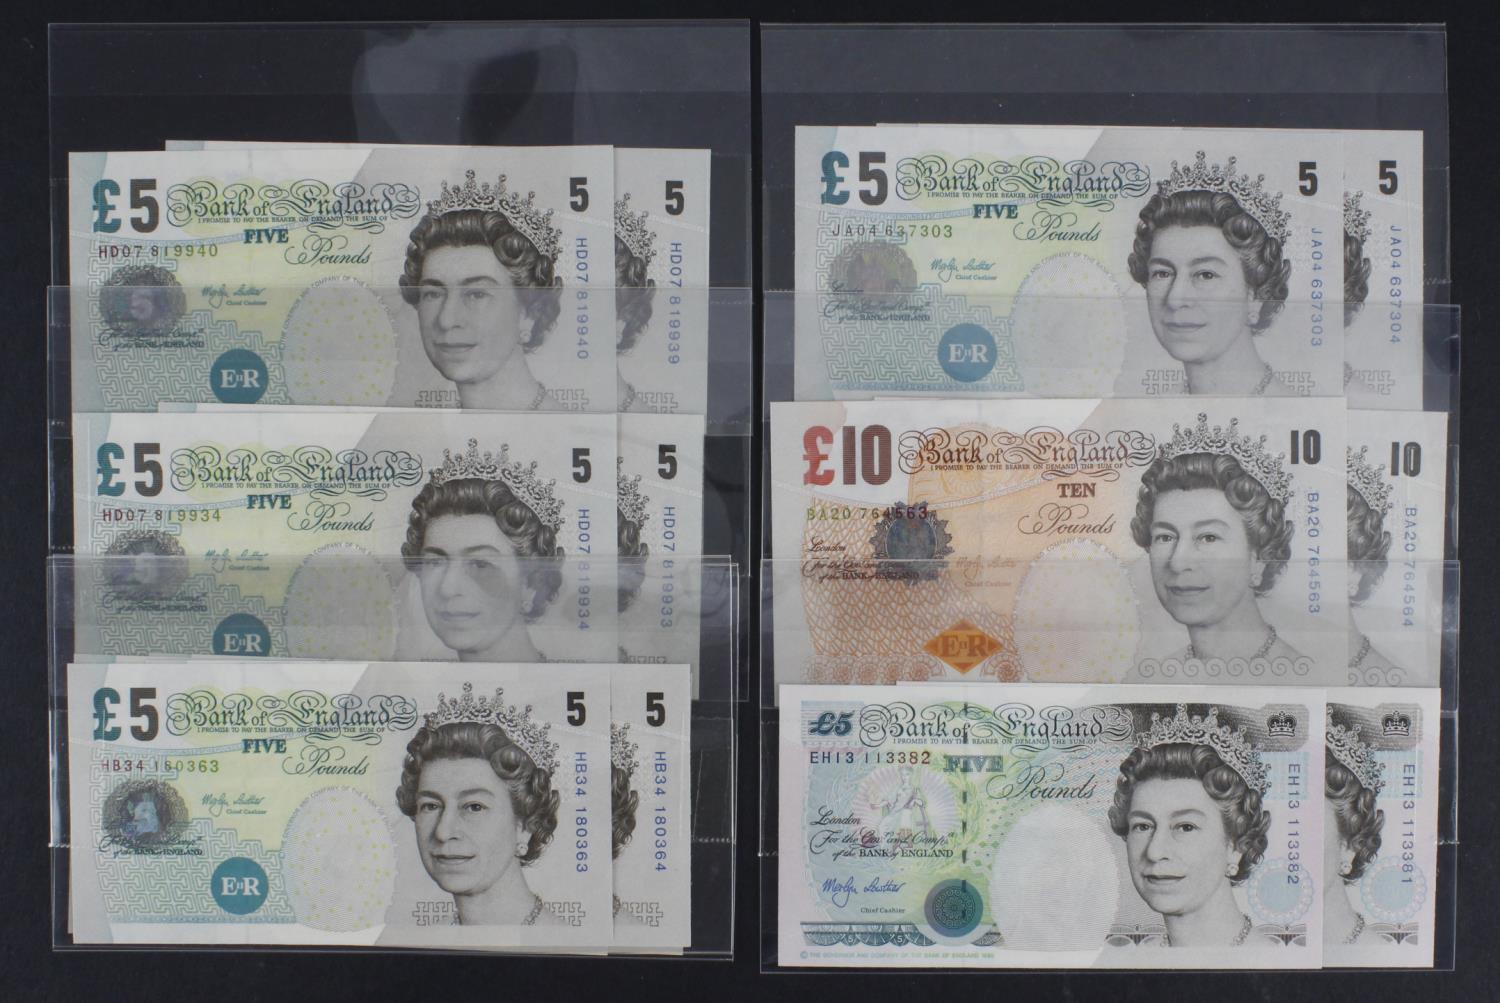 Lowther (14), a group of consecutive pairs, 10 Pounds issued 2000, BA20 764563 - BA20 764563, 5